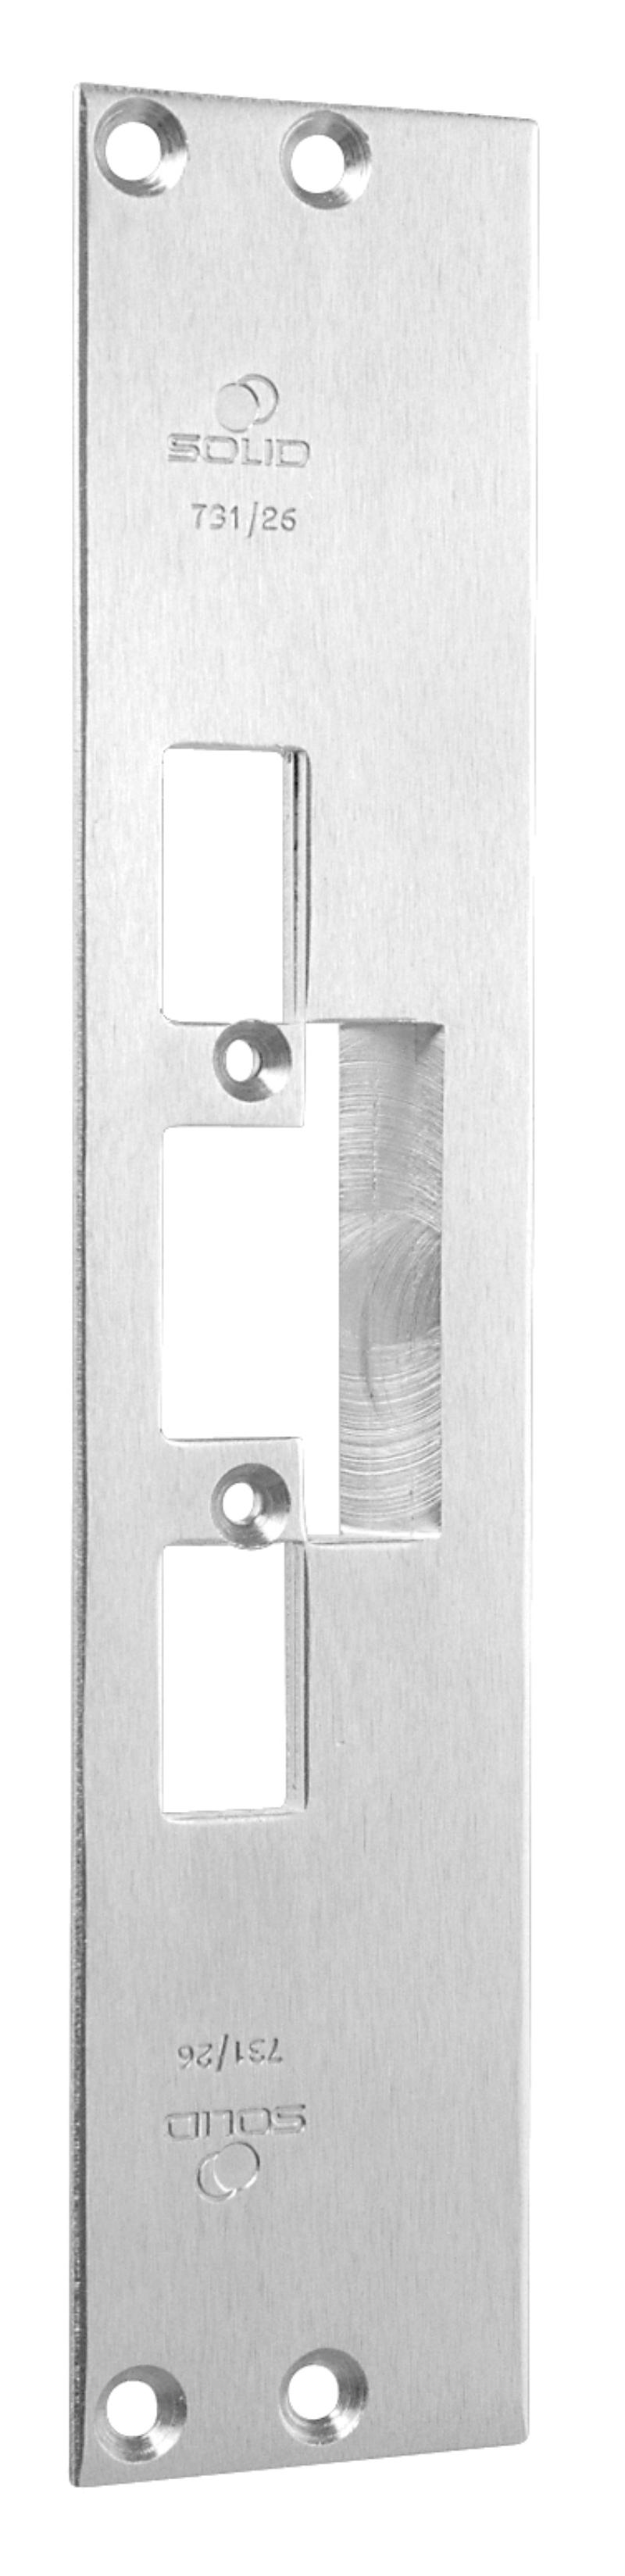 Solid post 731 - 26mm, electric end plate (971358)